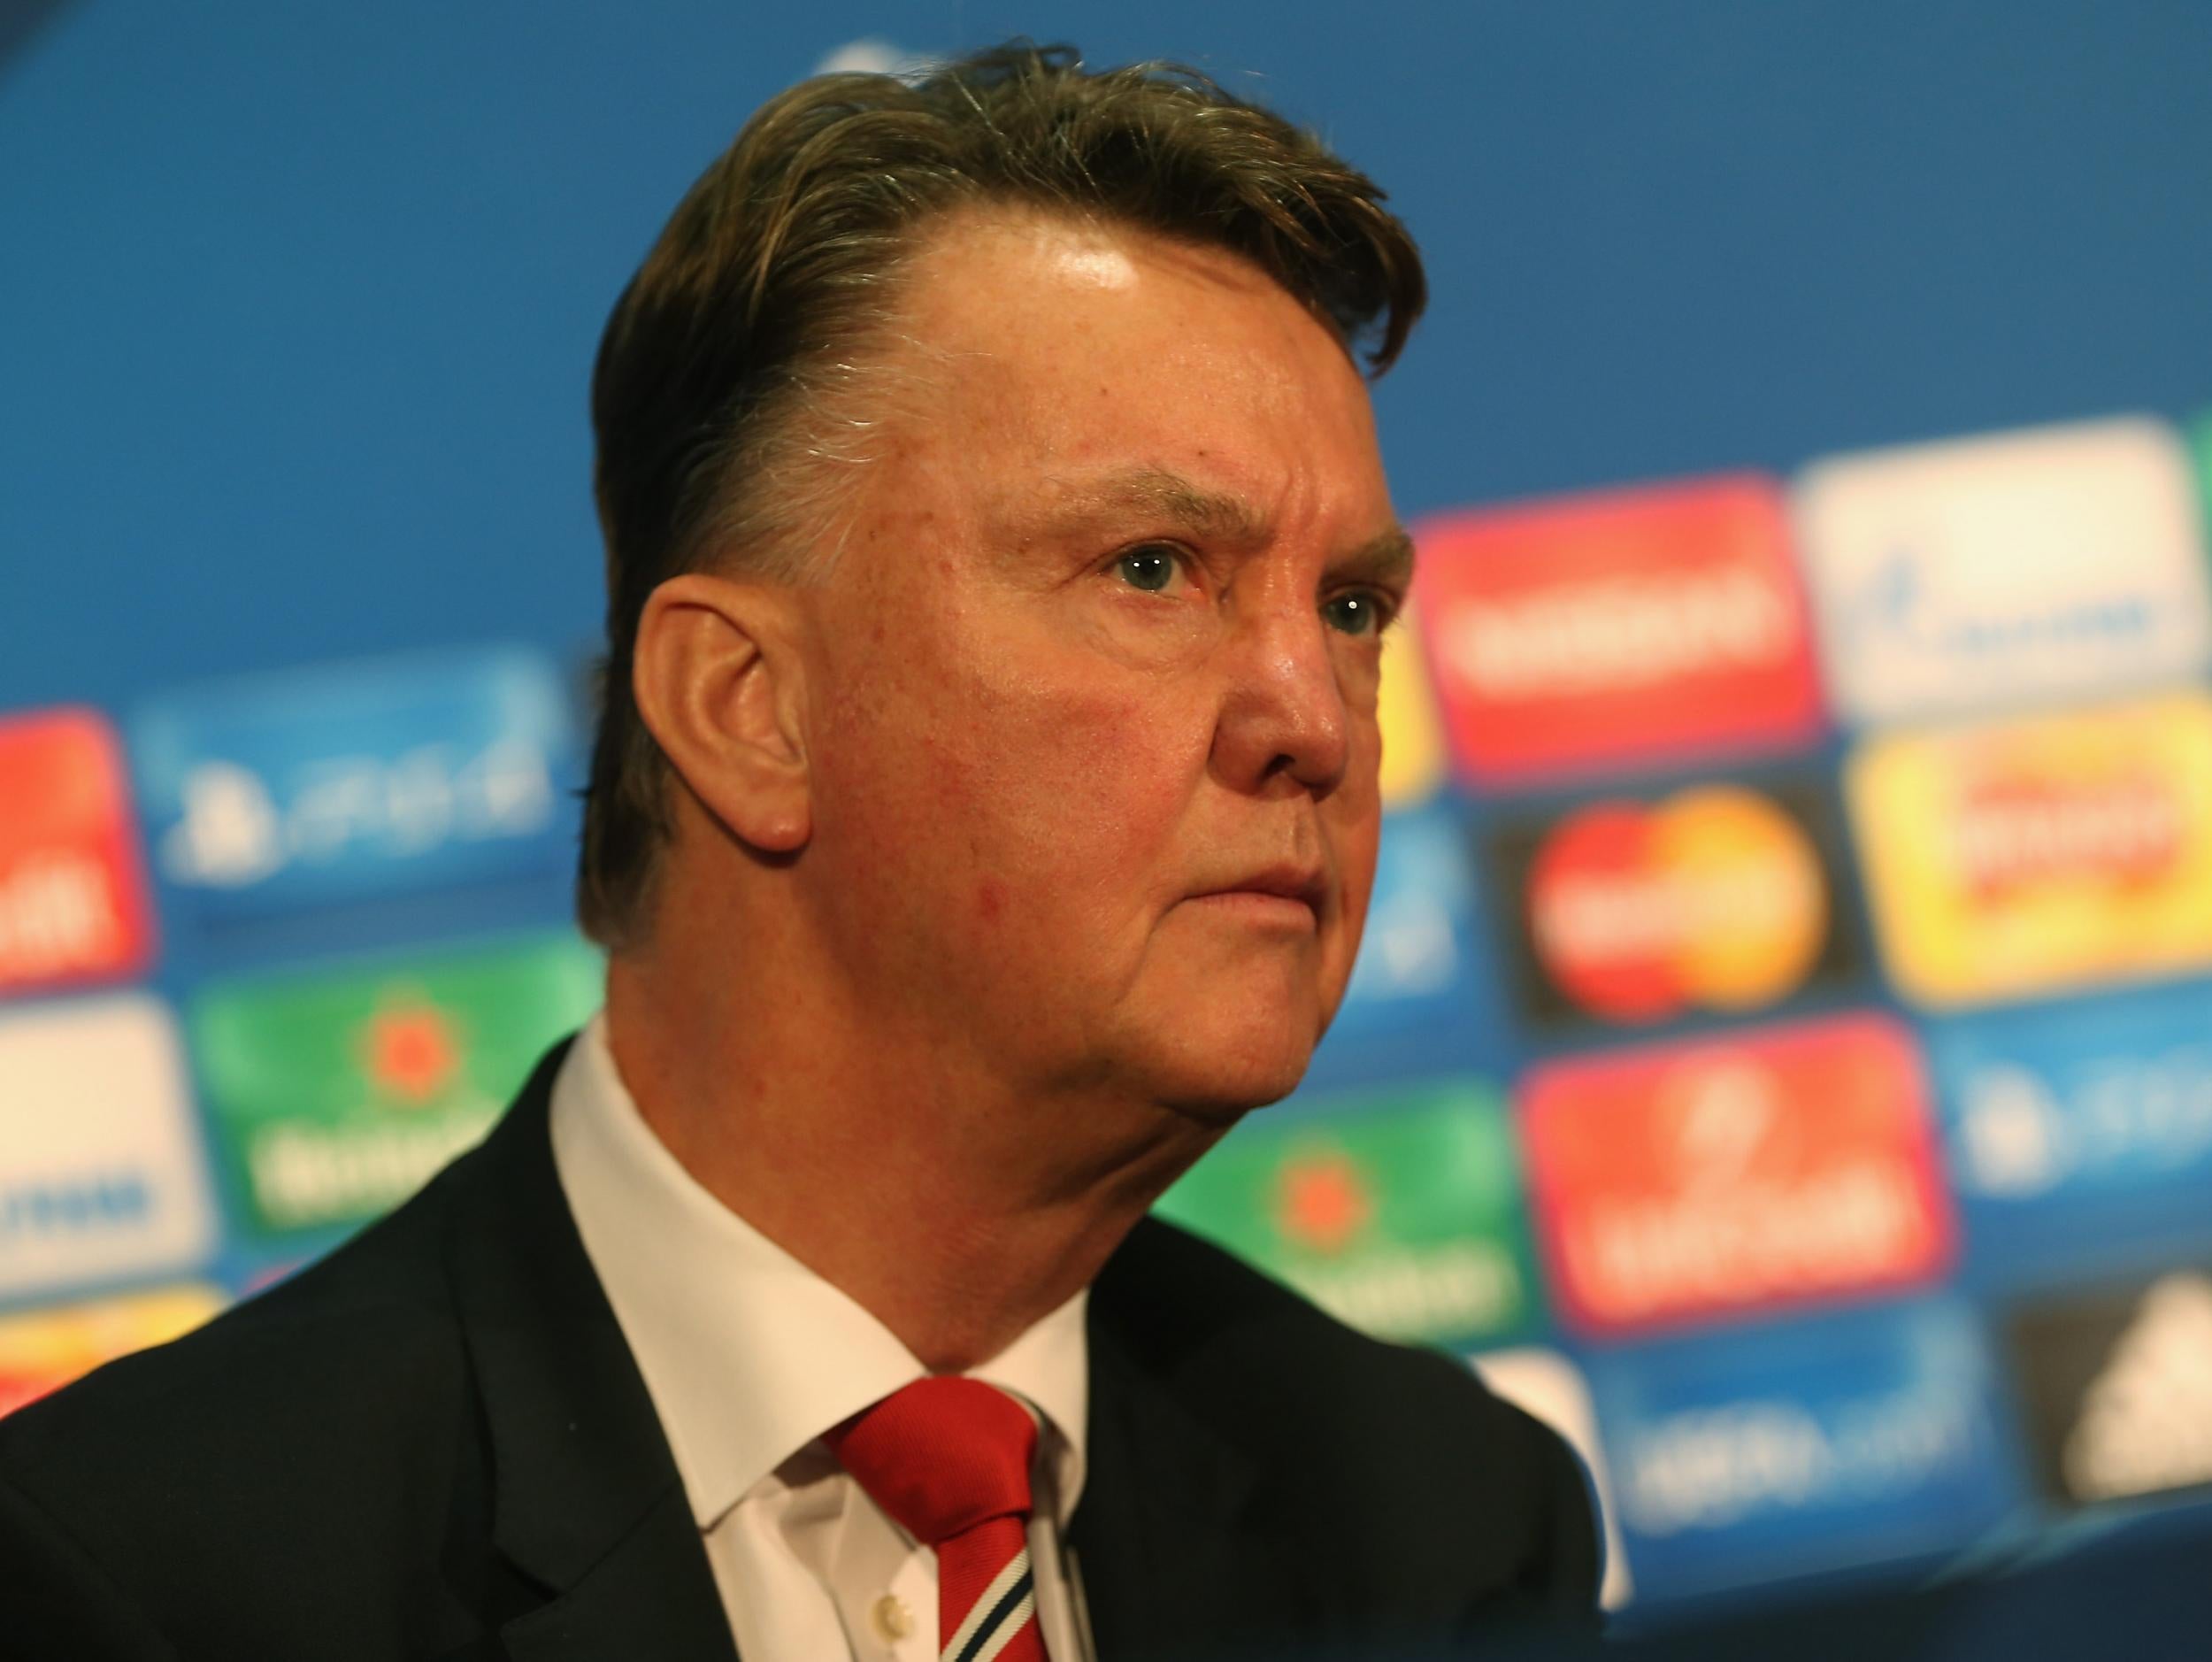 Manchester United manager Louis van Gaal addresses the media